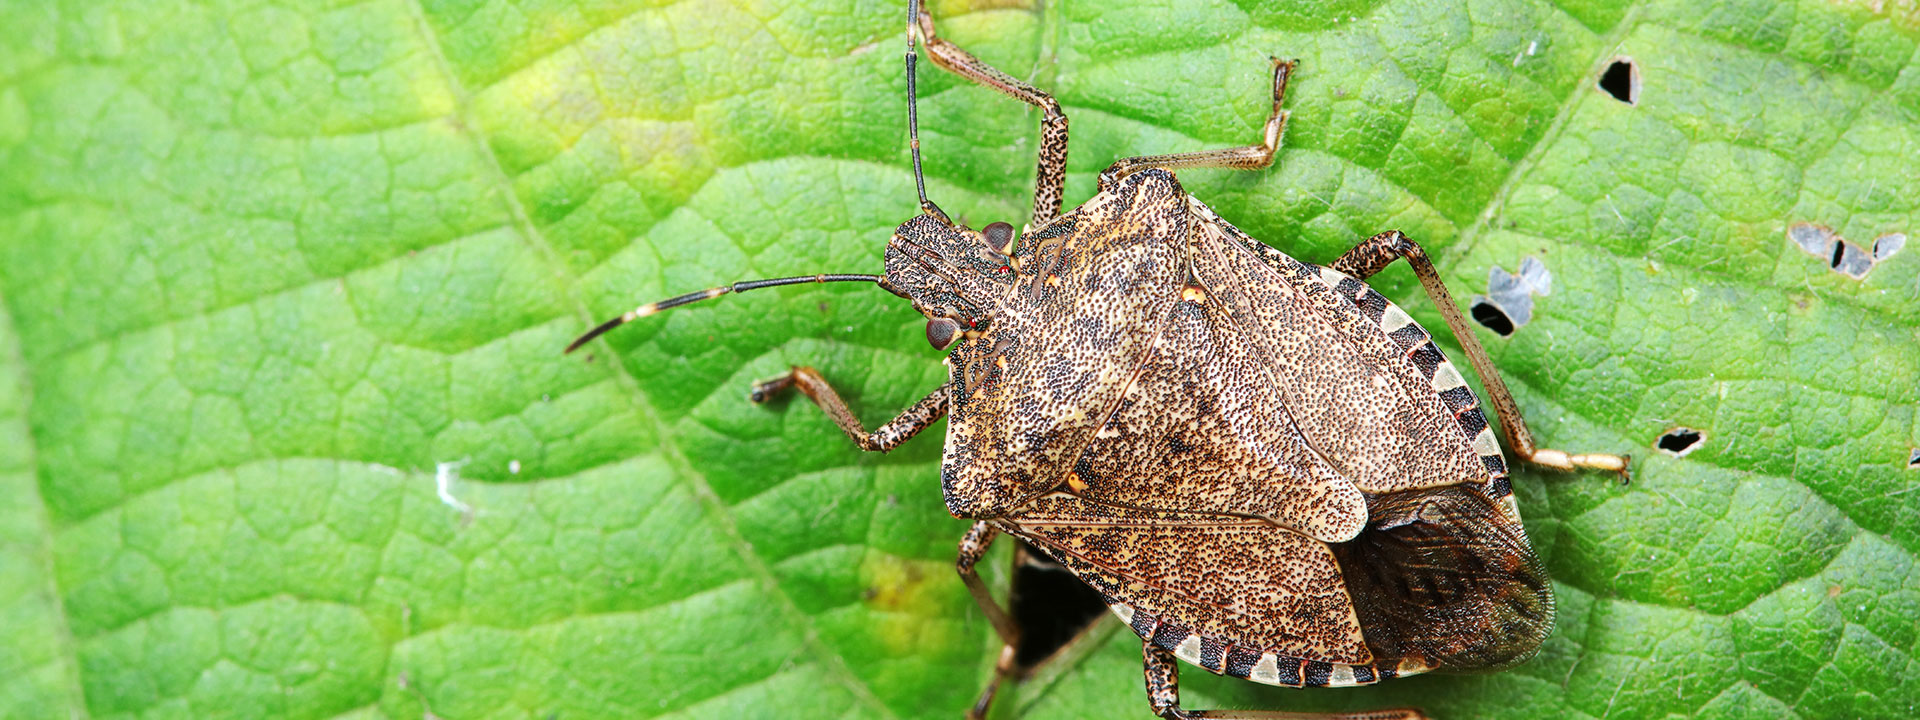 Closeup of a spotted stink bug on a green leaf.